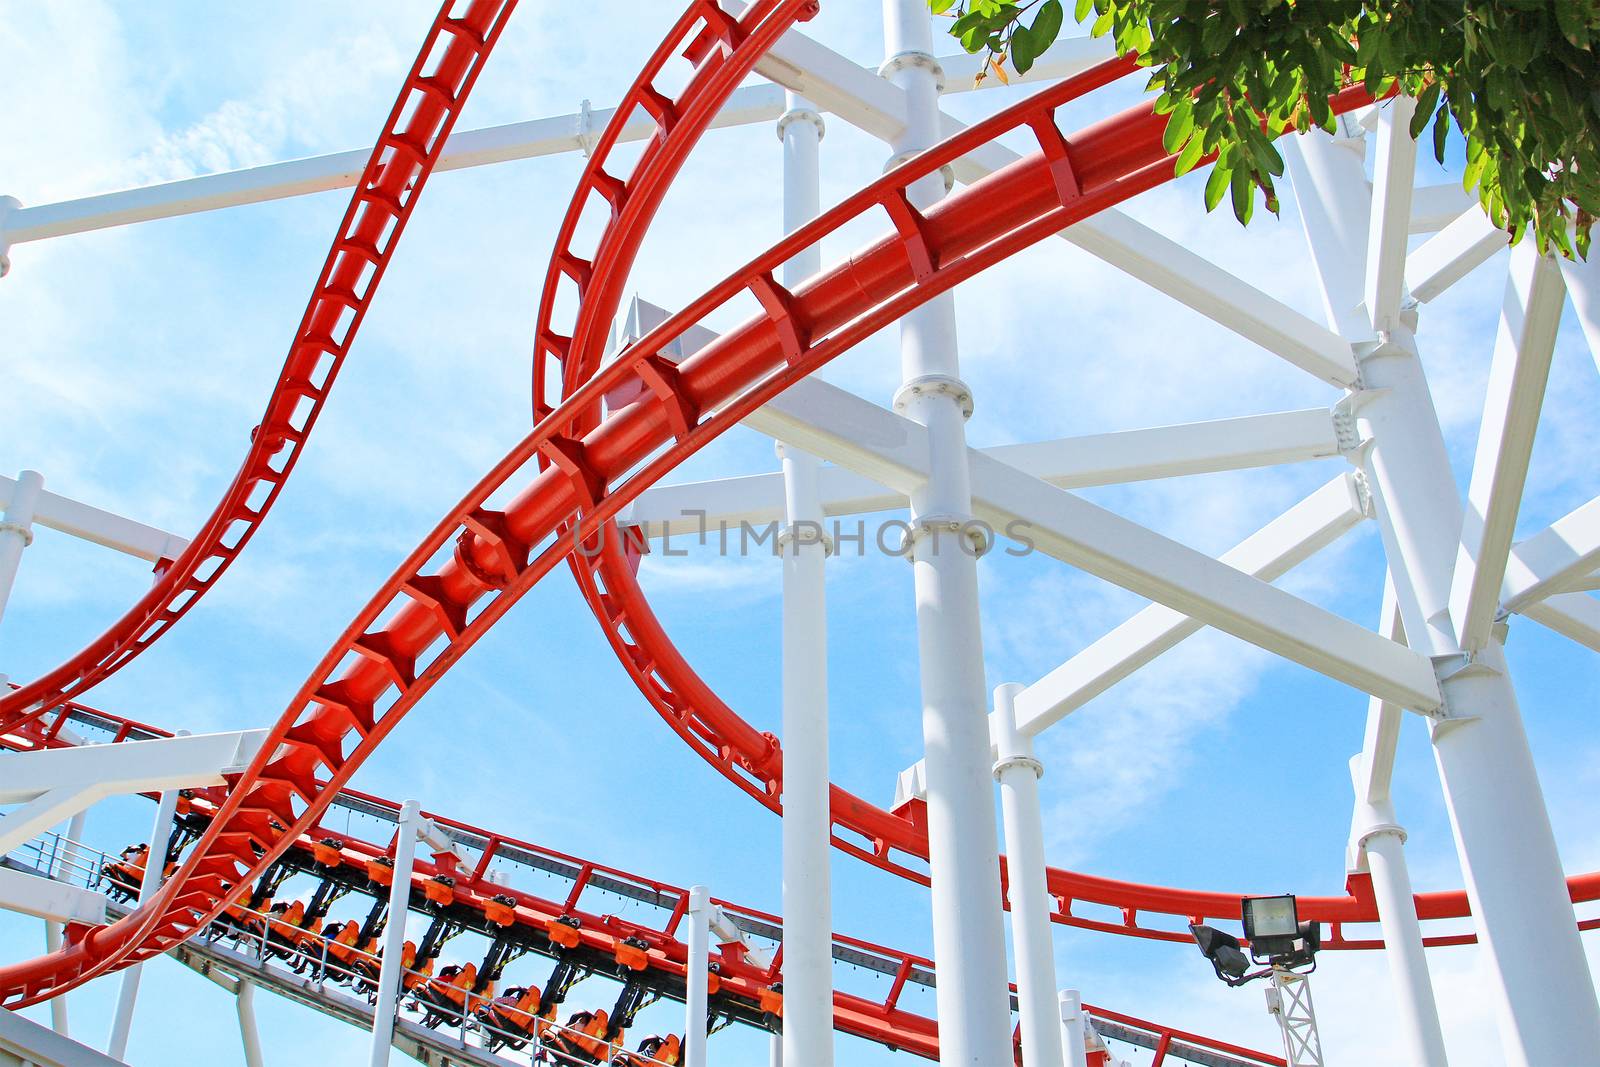 Segment of roller coaster by foto76